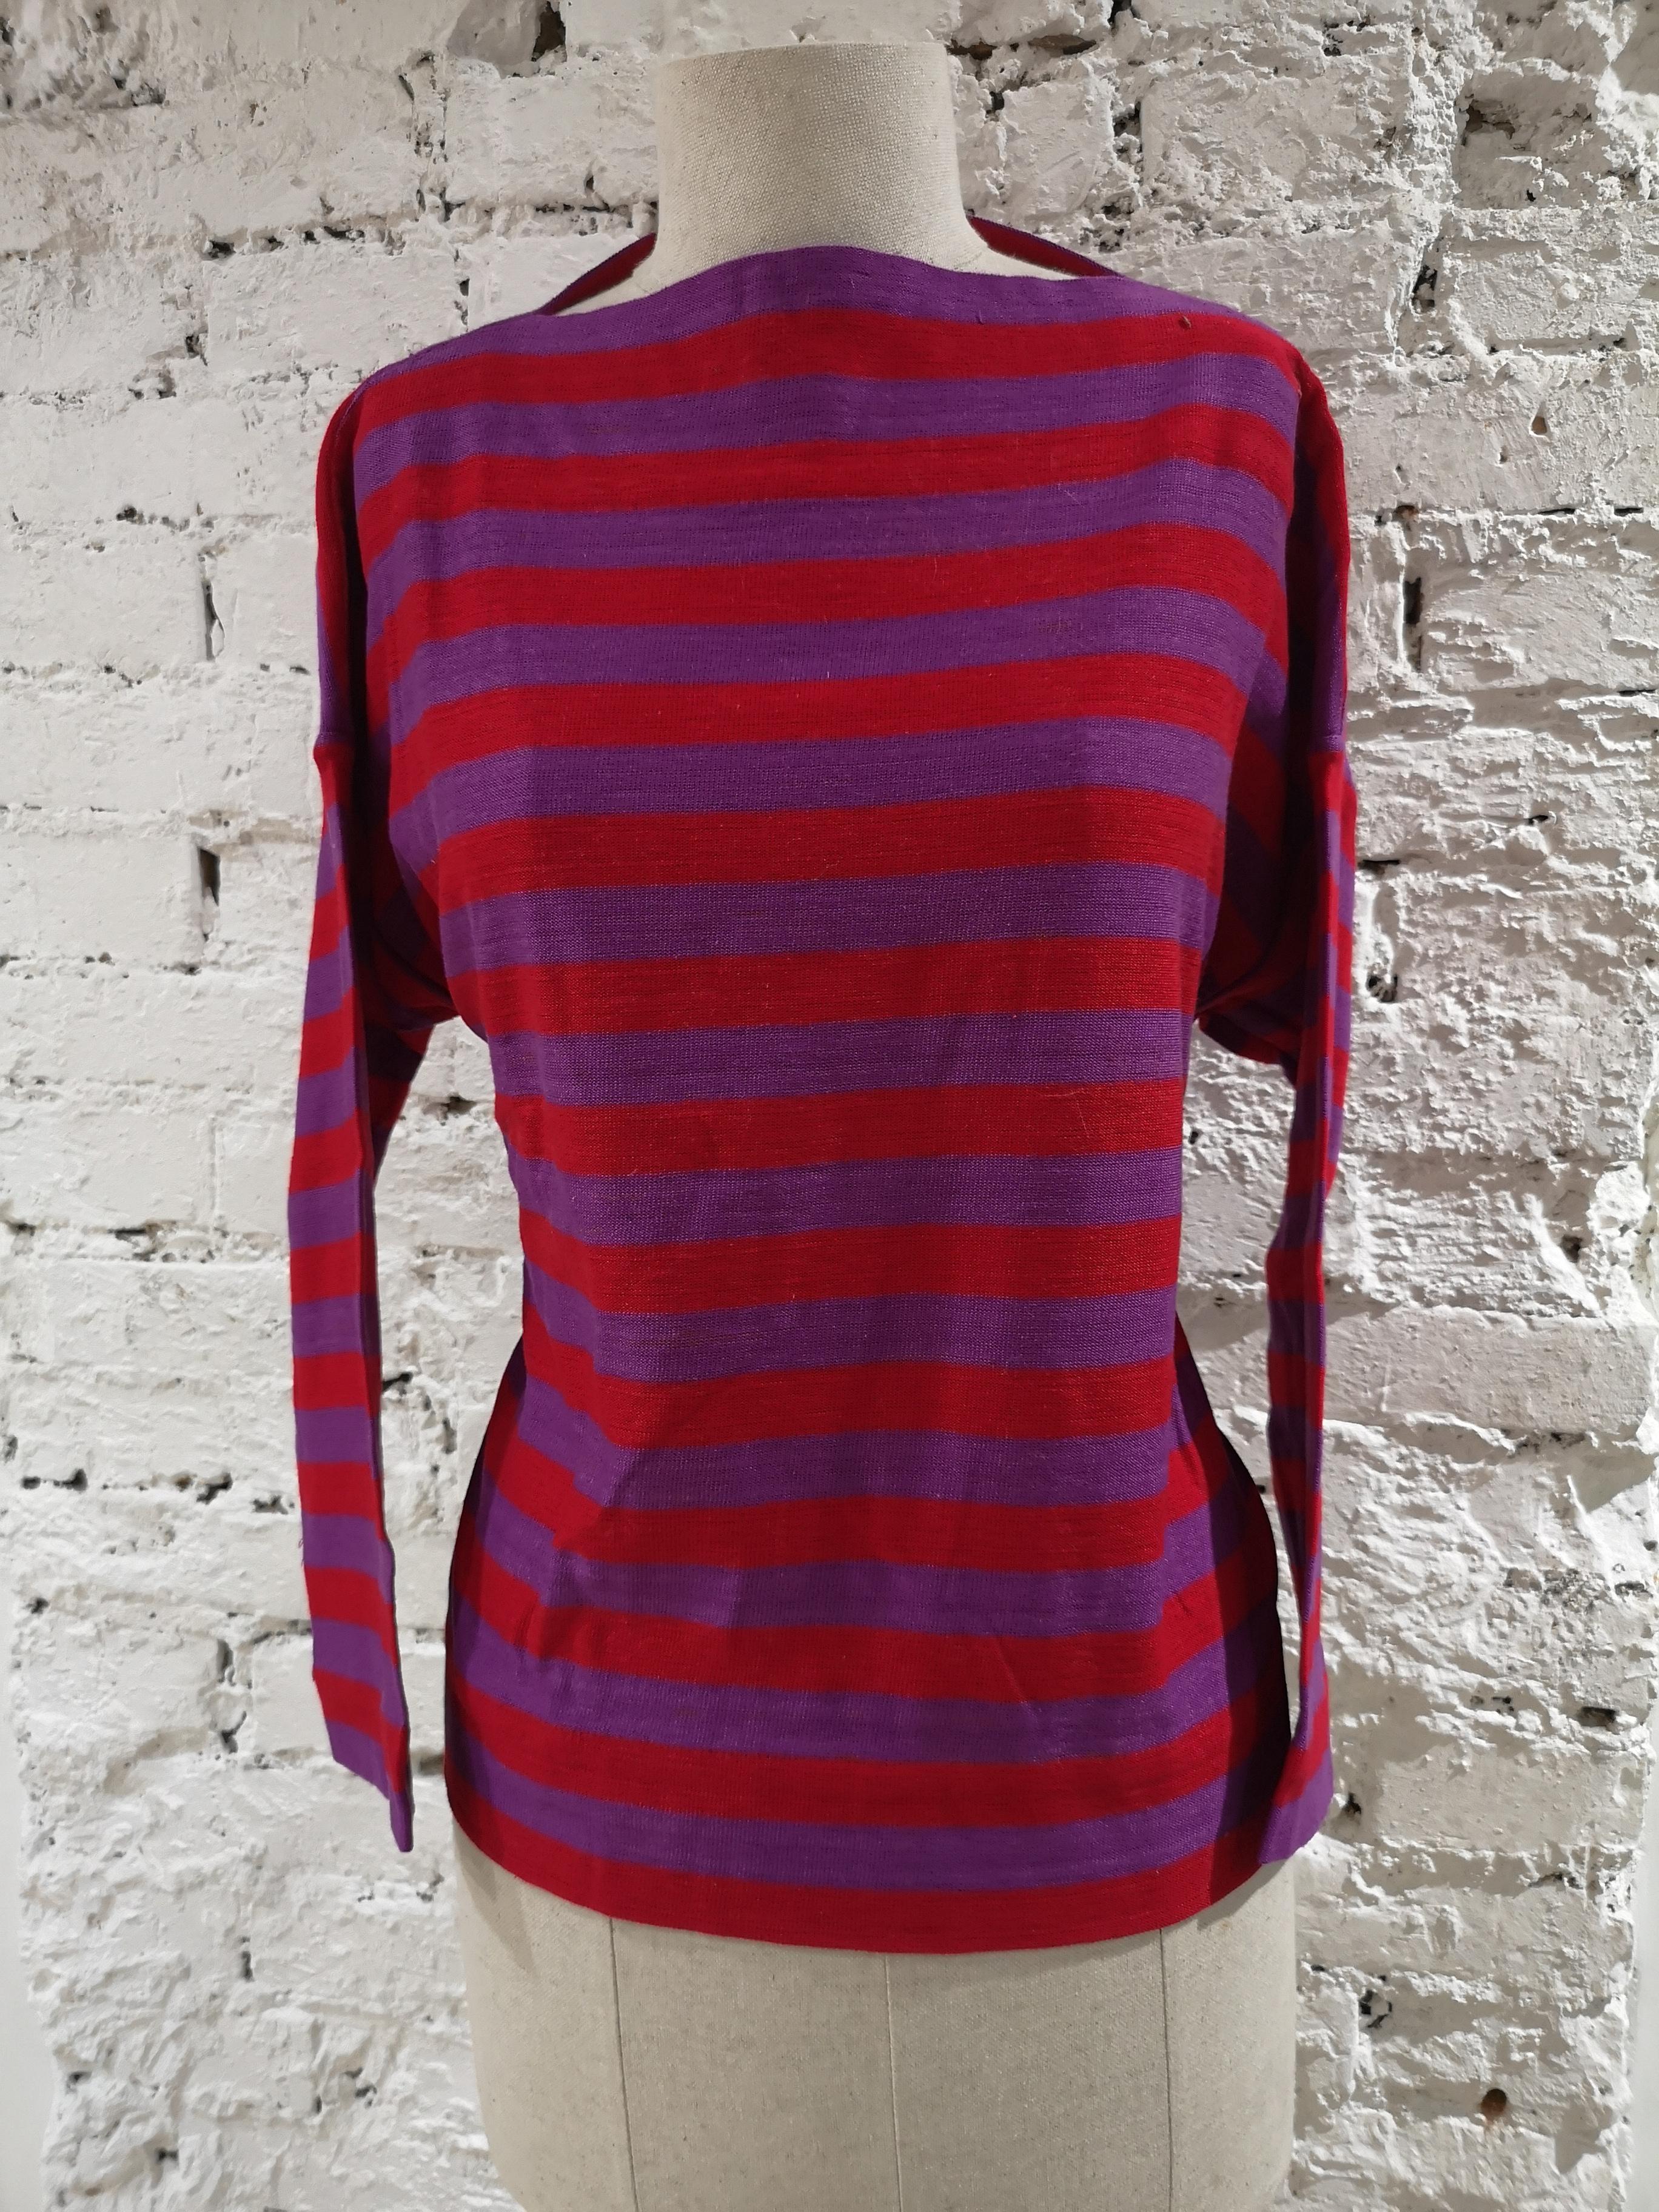 Vintage red and purple stripes t-shirt sweater
Size S